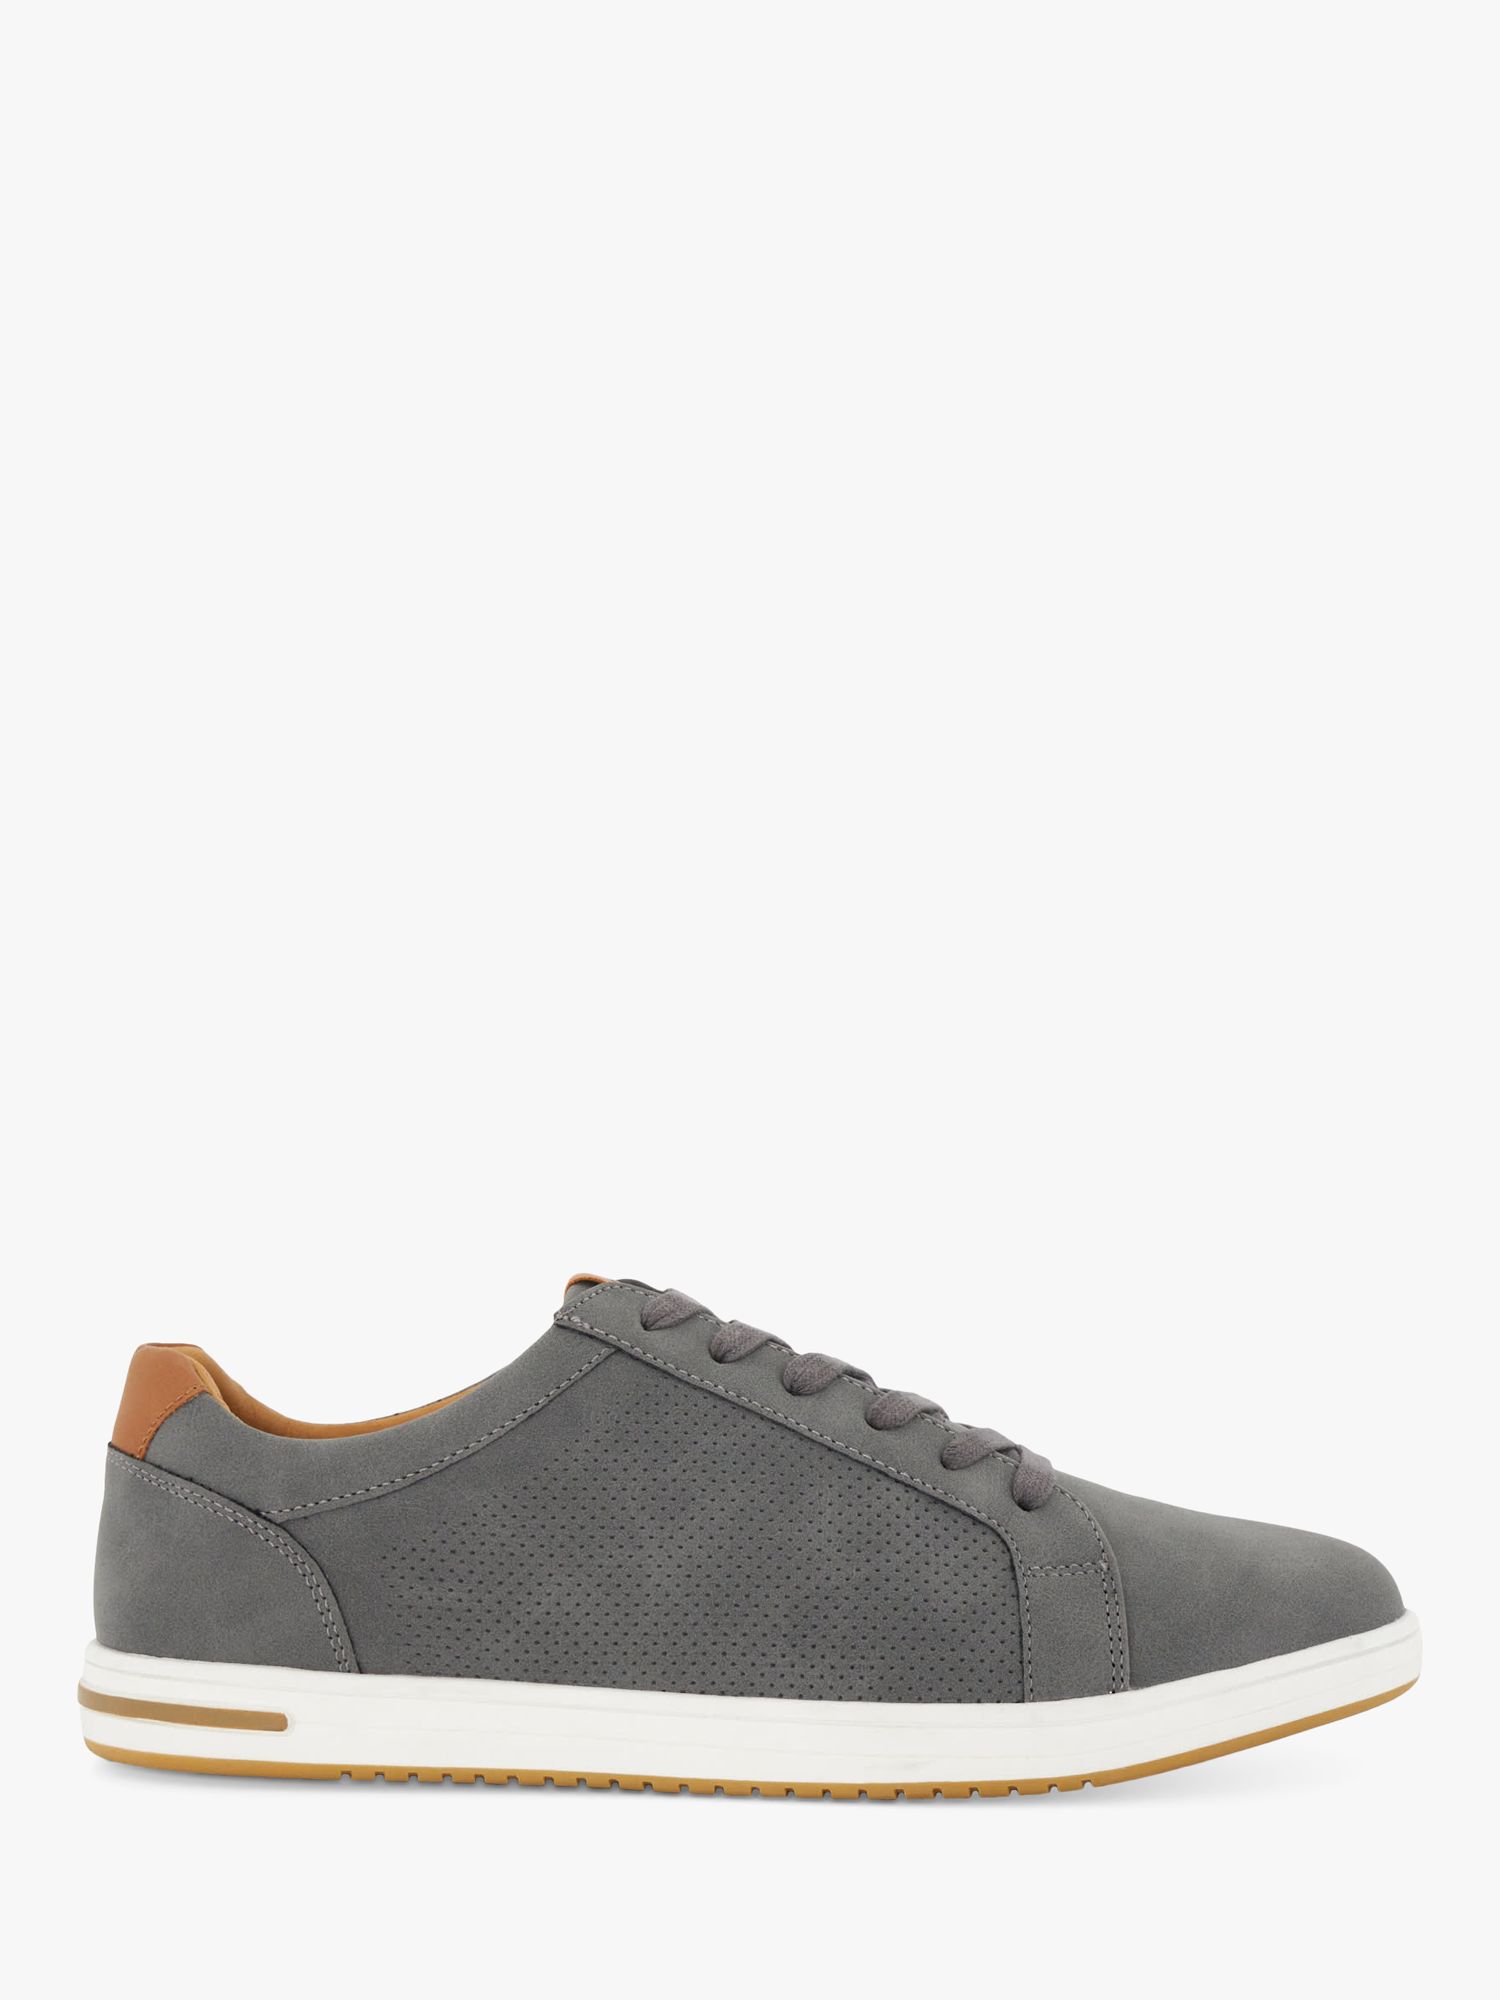 Dune Wide Fit Tezzy Suedette Lace Up Trainers, Grey, 6